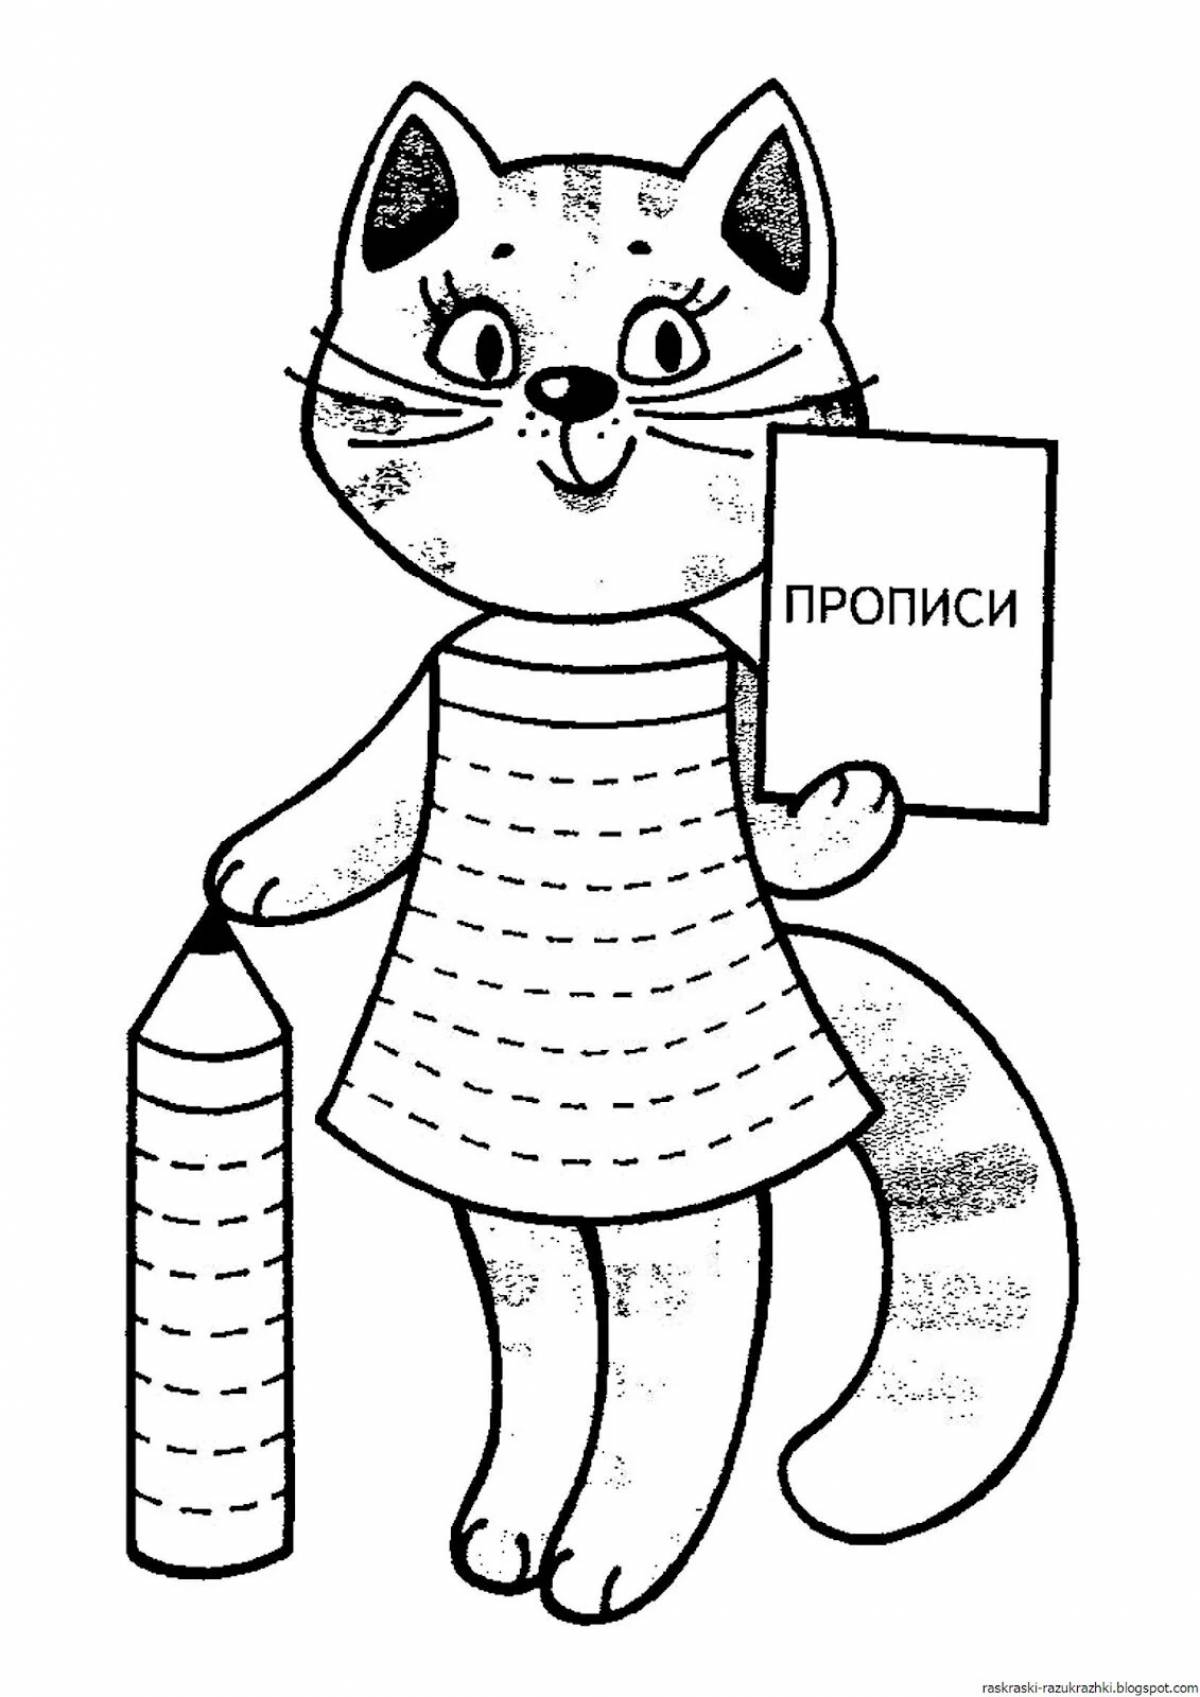 Coloring page for children 7-8 years old